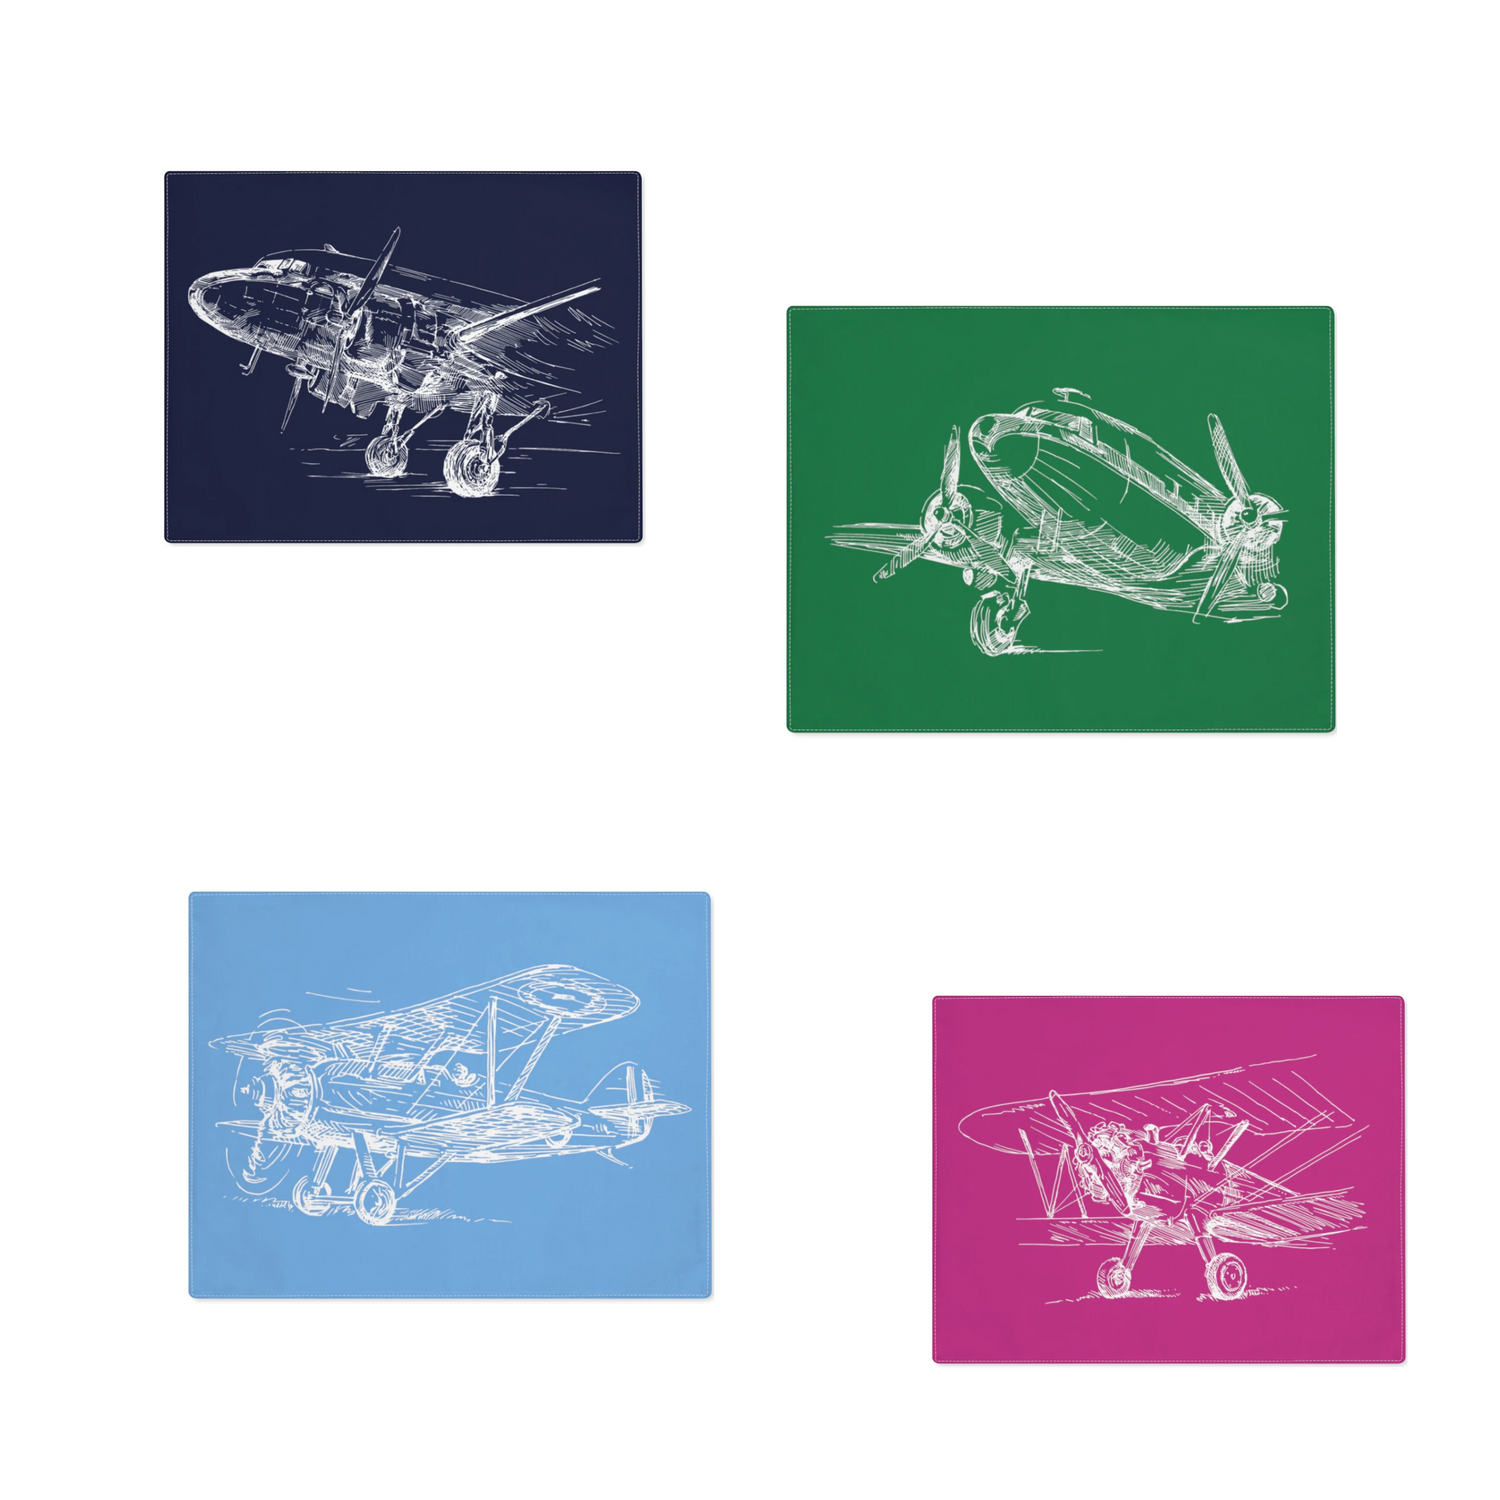 100% cotton, 18" x 14" aviation themed kitchen placemats